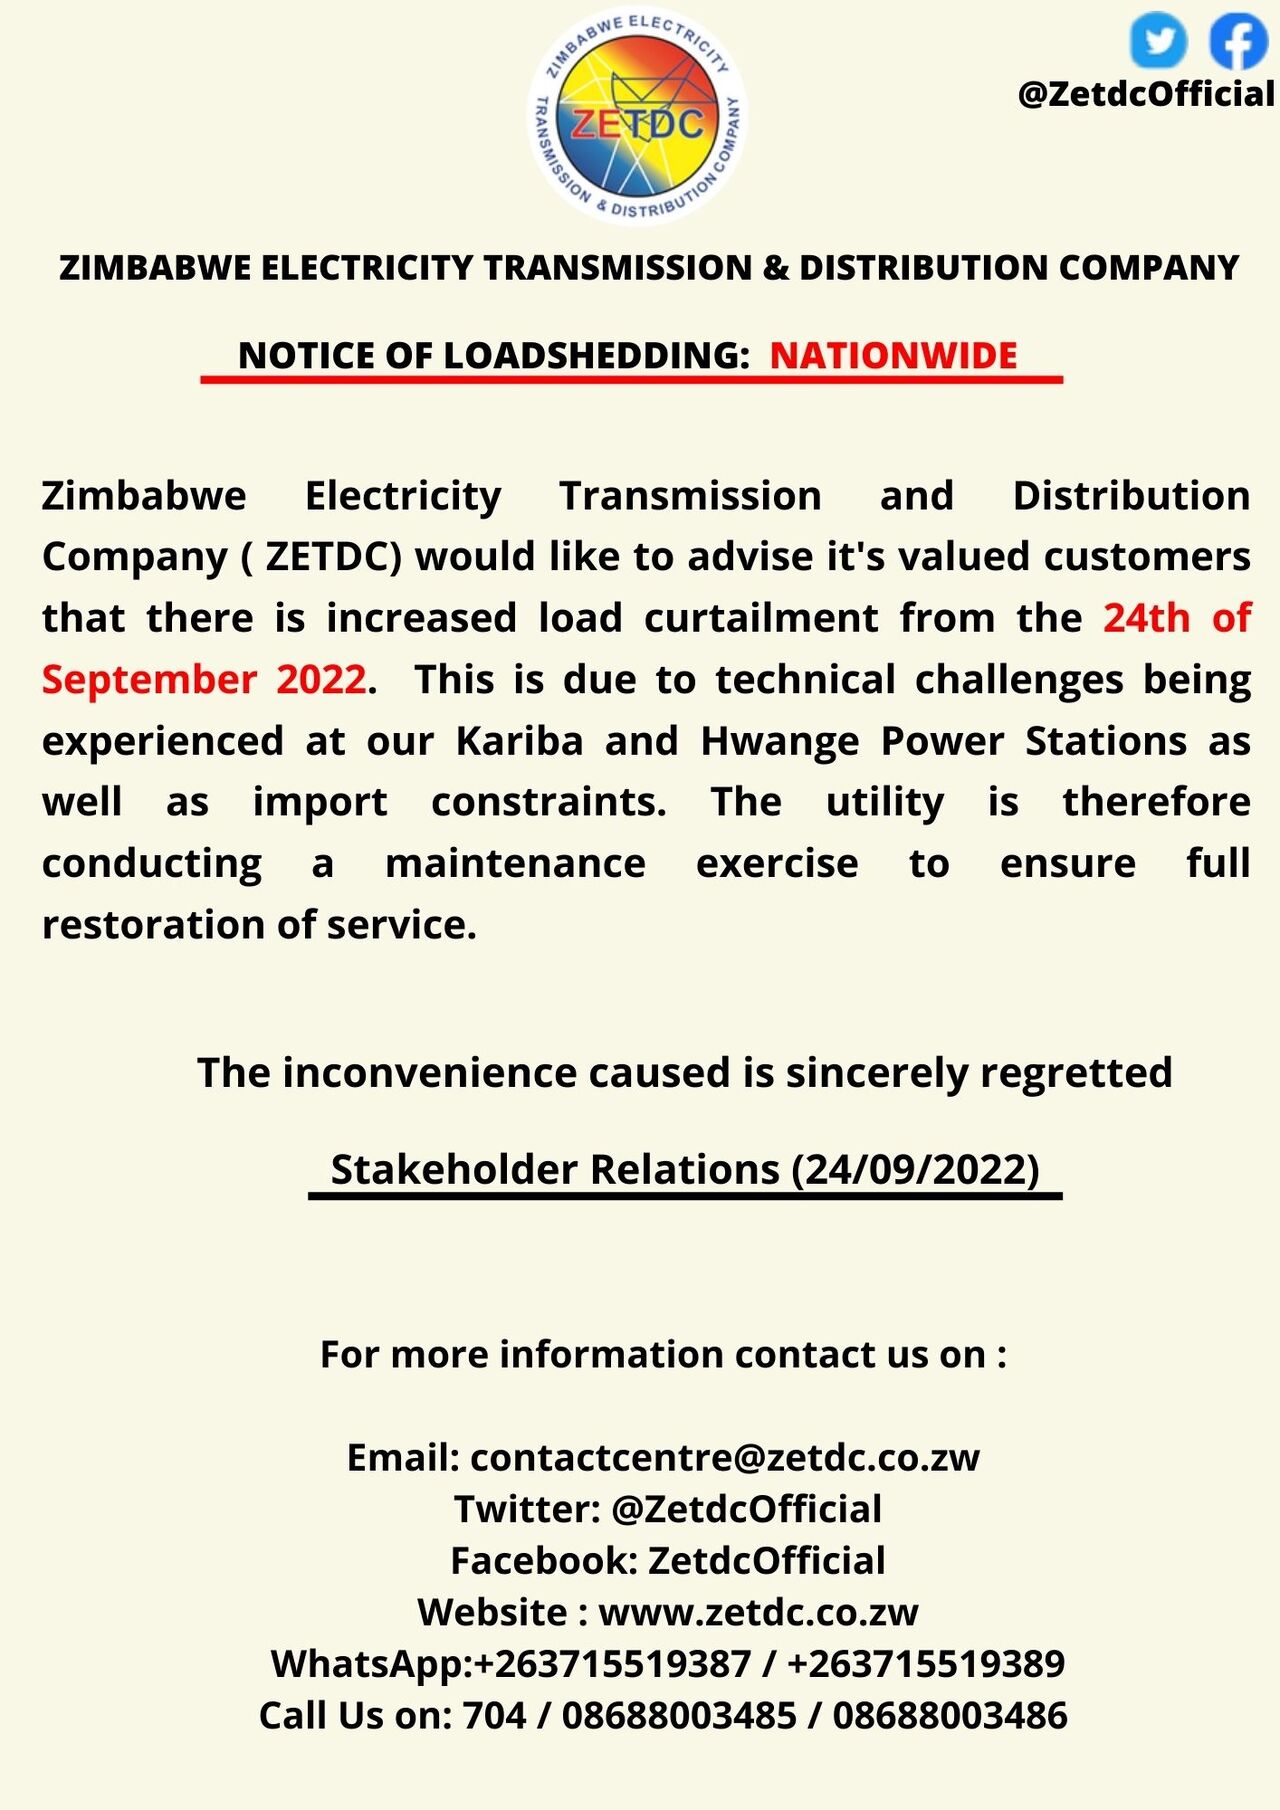 Expect More Hours Of Load Shedding: ZESA Delivers Bad News As Electricity Power Cuts Get Worse